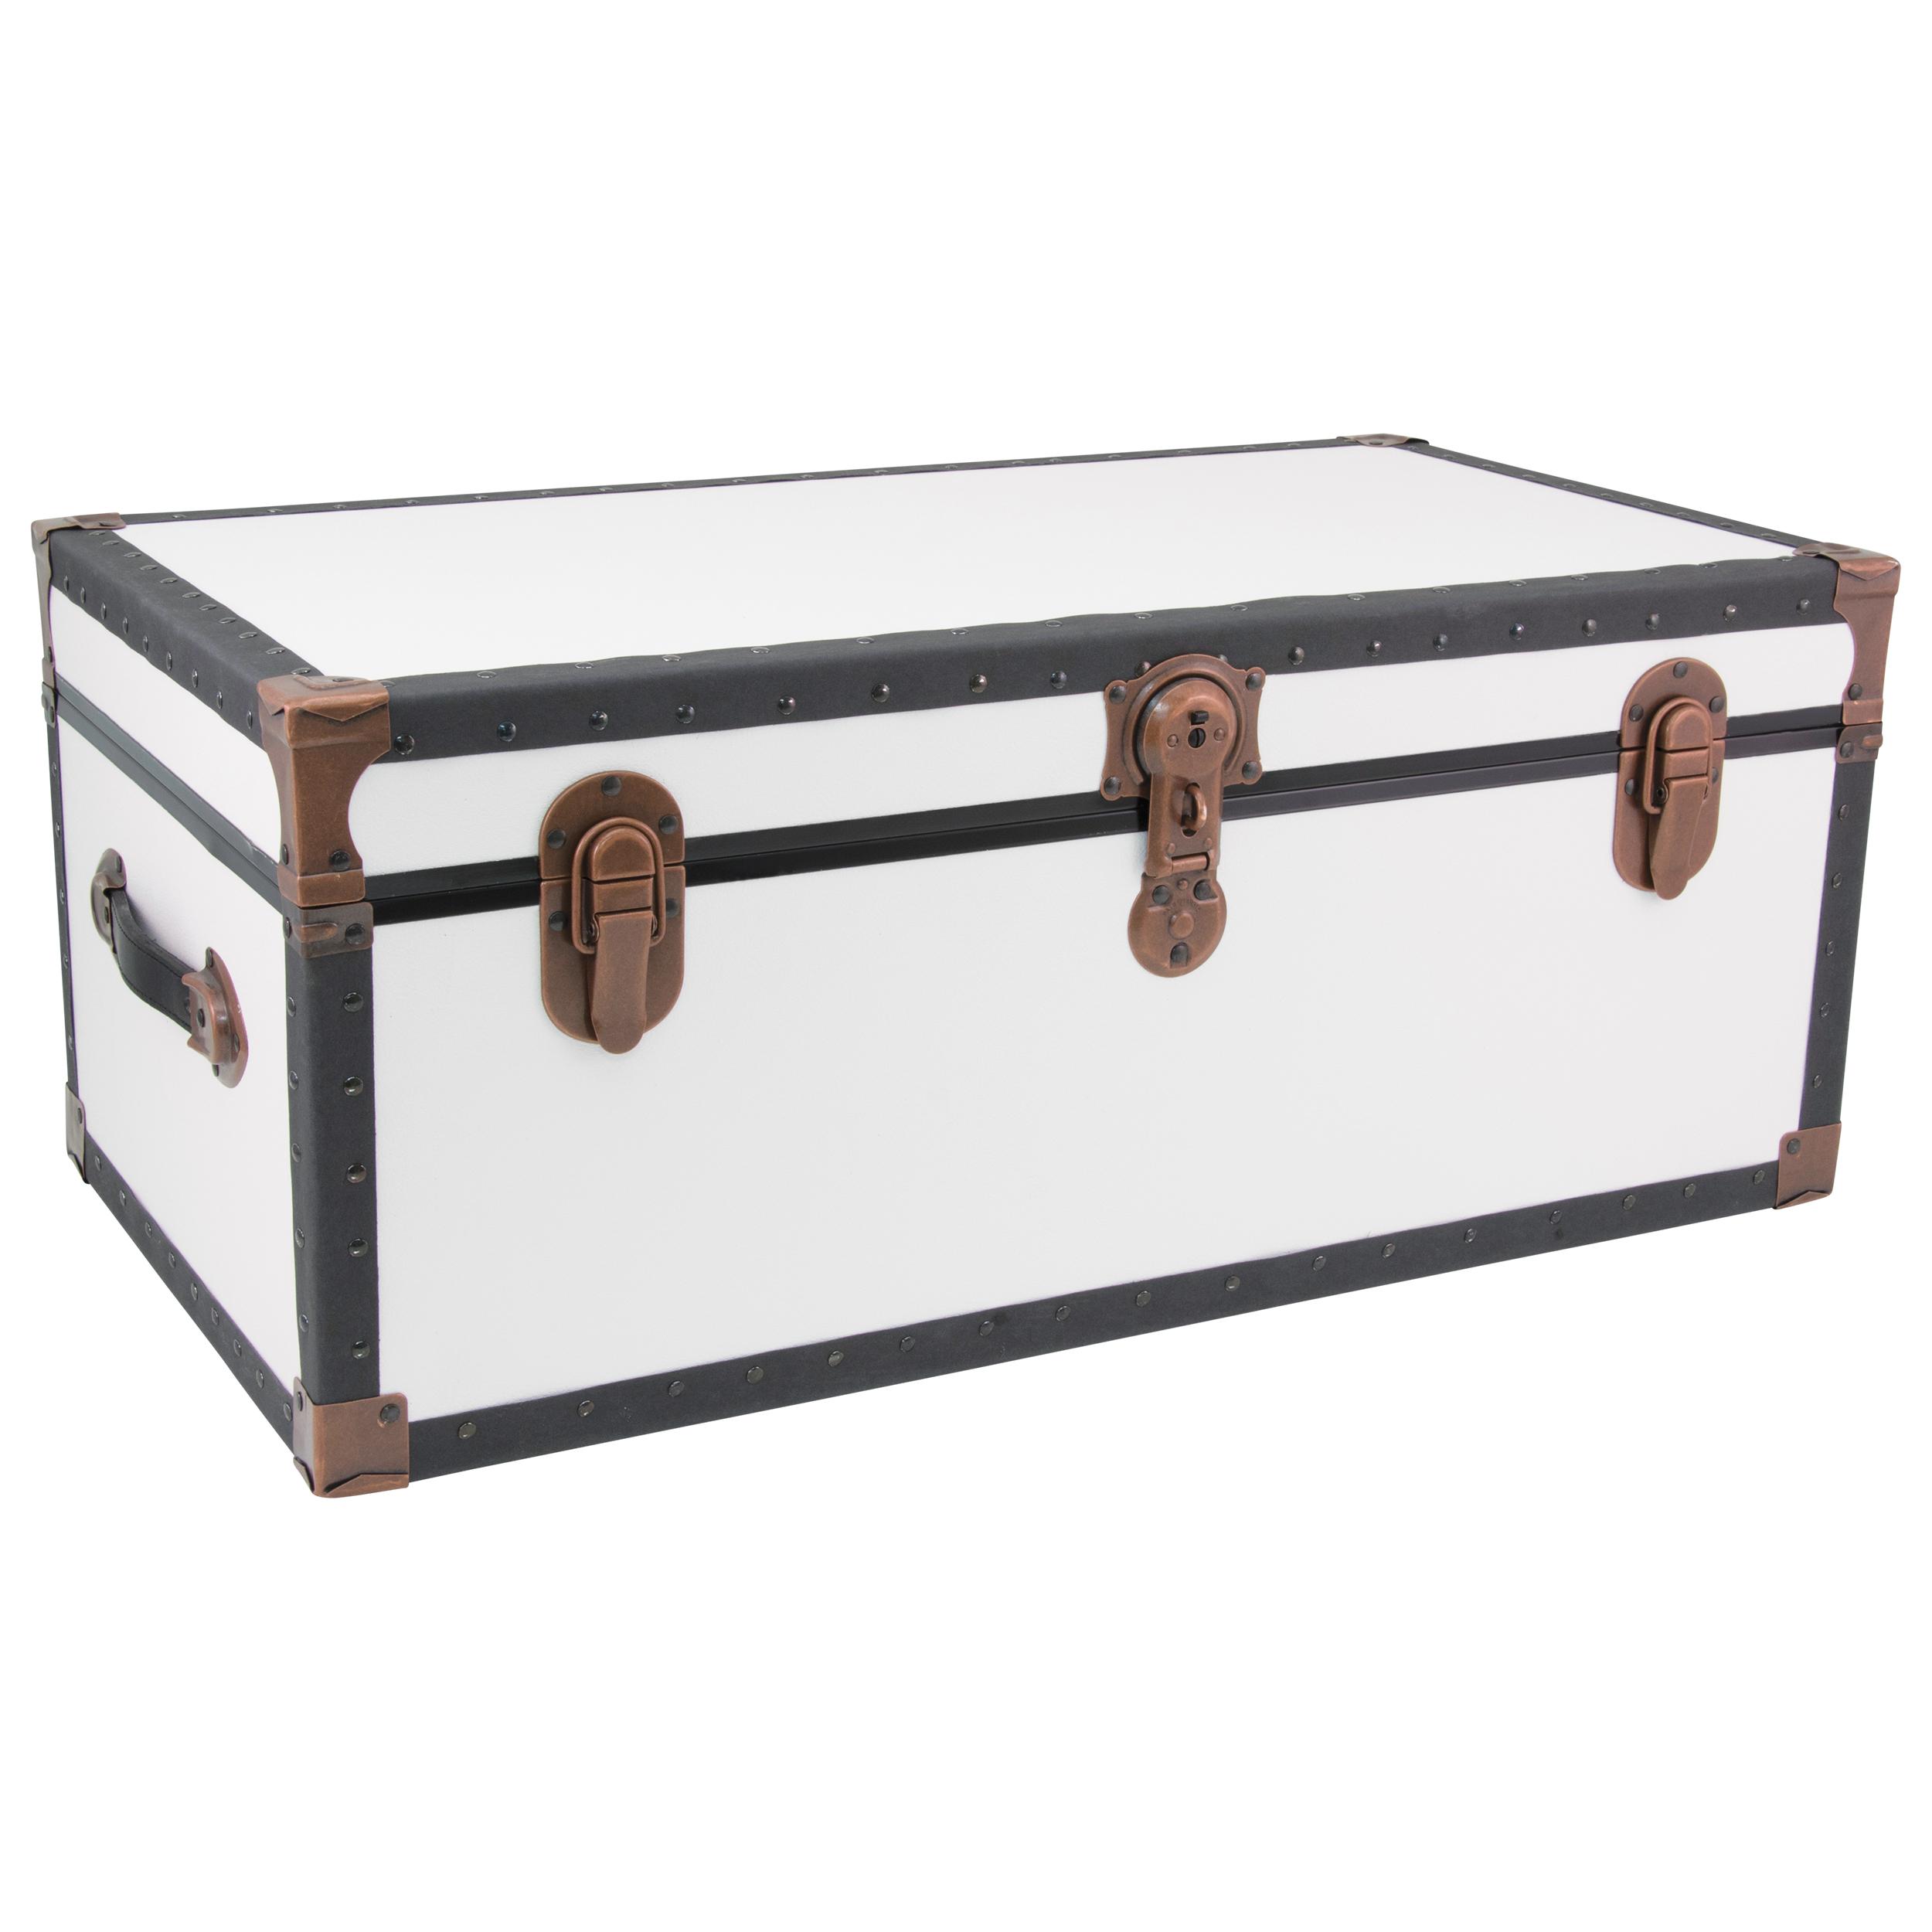 Seward Trunks 25 Gallon Wood, Plastic and Metal Trunk, White - image 1 of 8